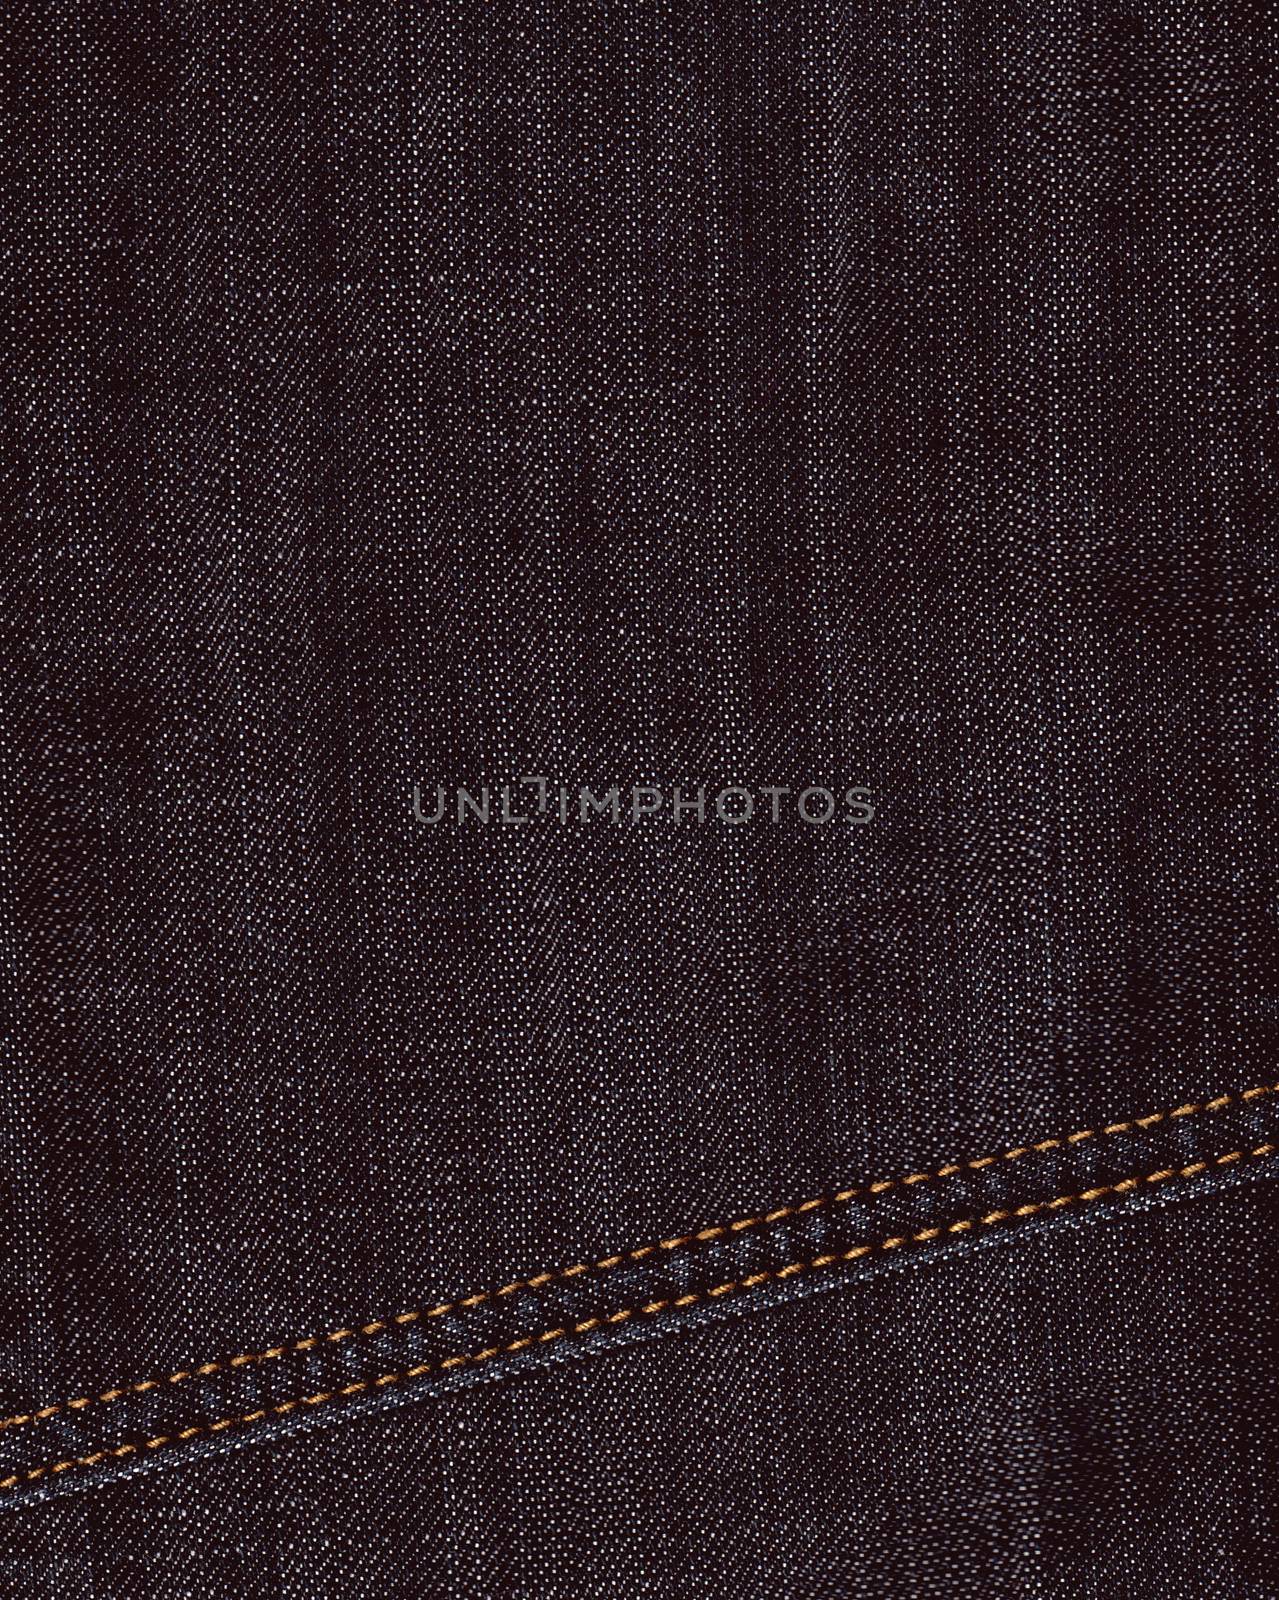 Real black jeans denim texture, background with stitch